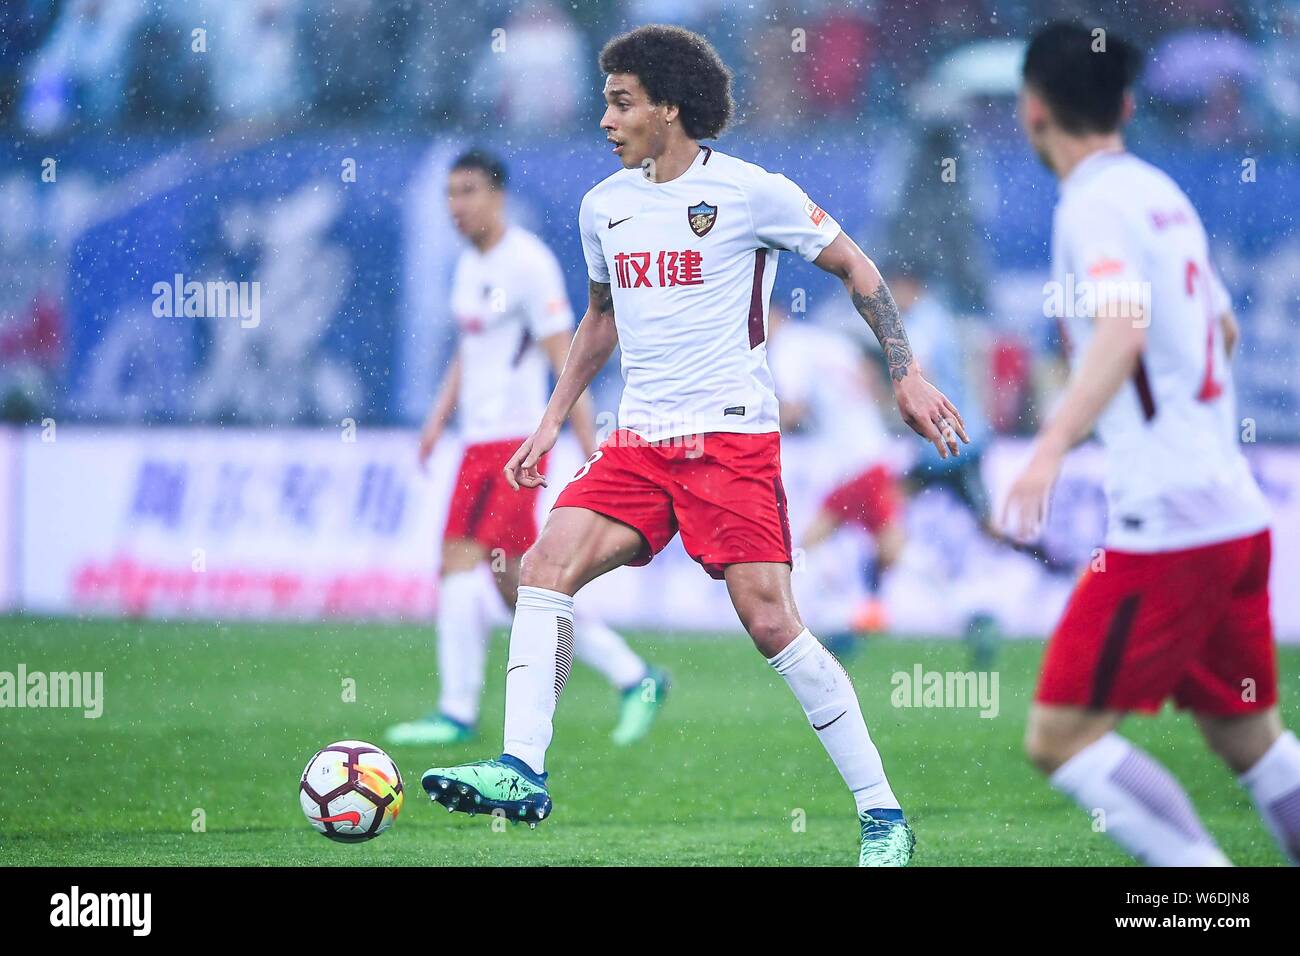 Belgian football player Axel Witsel of Tianjin Quanjian kicks the ball to make a pass against Dalian Yifang in their seventh round match during the 20 Stock Photo